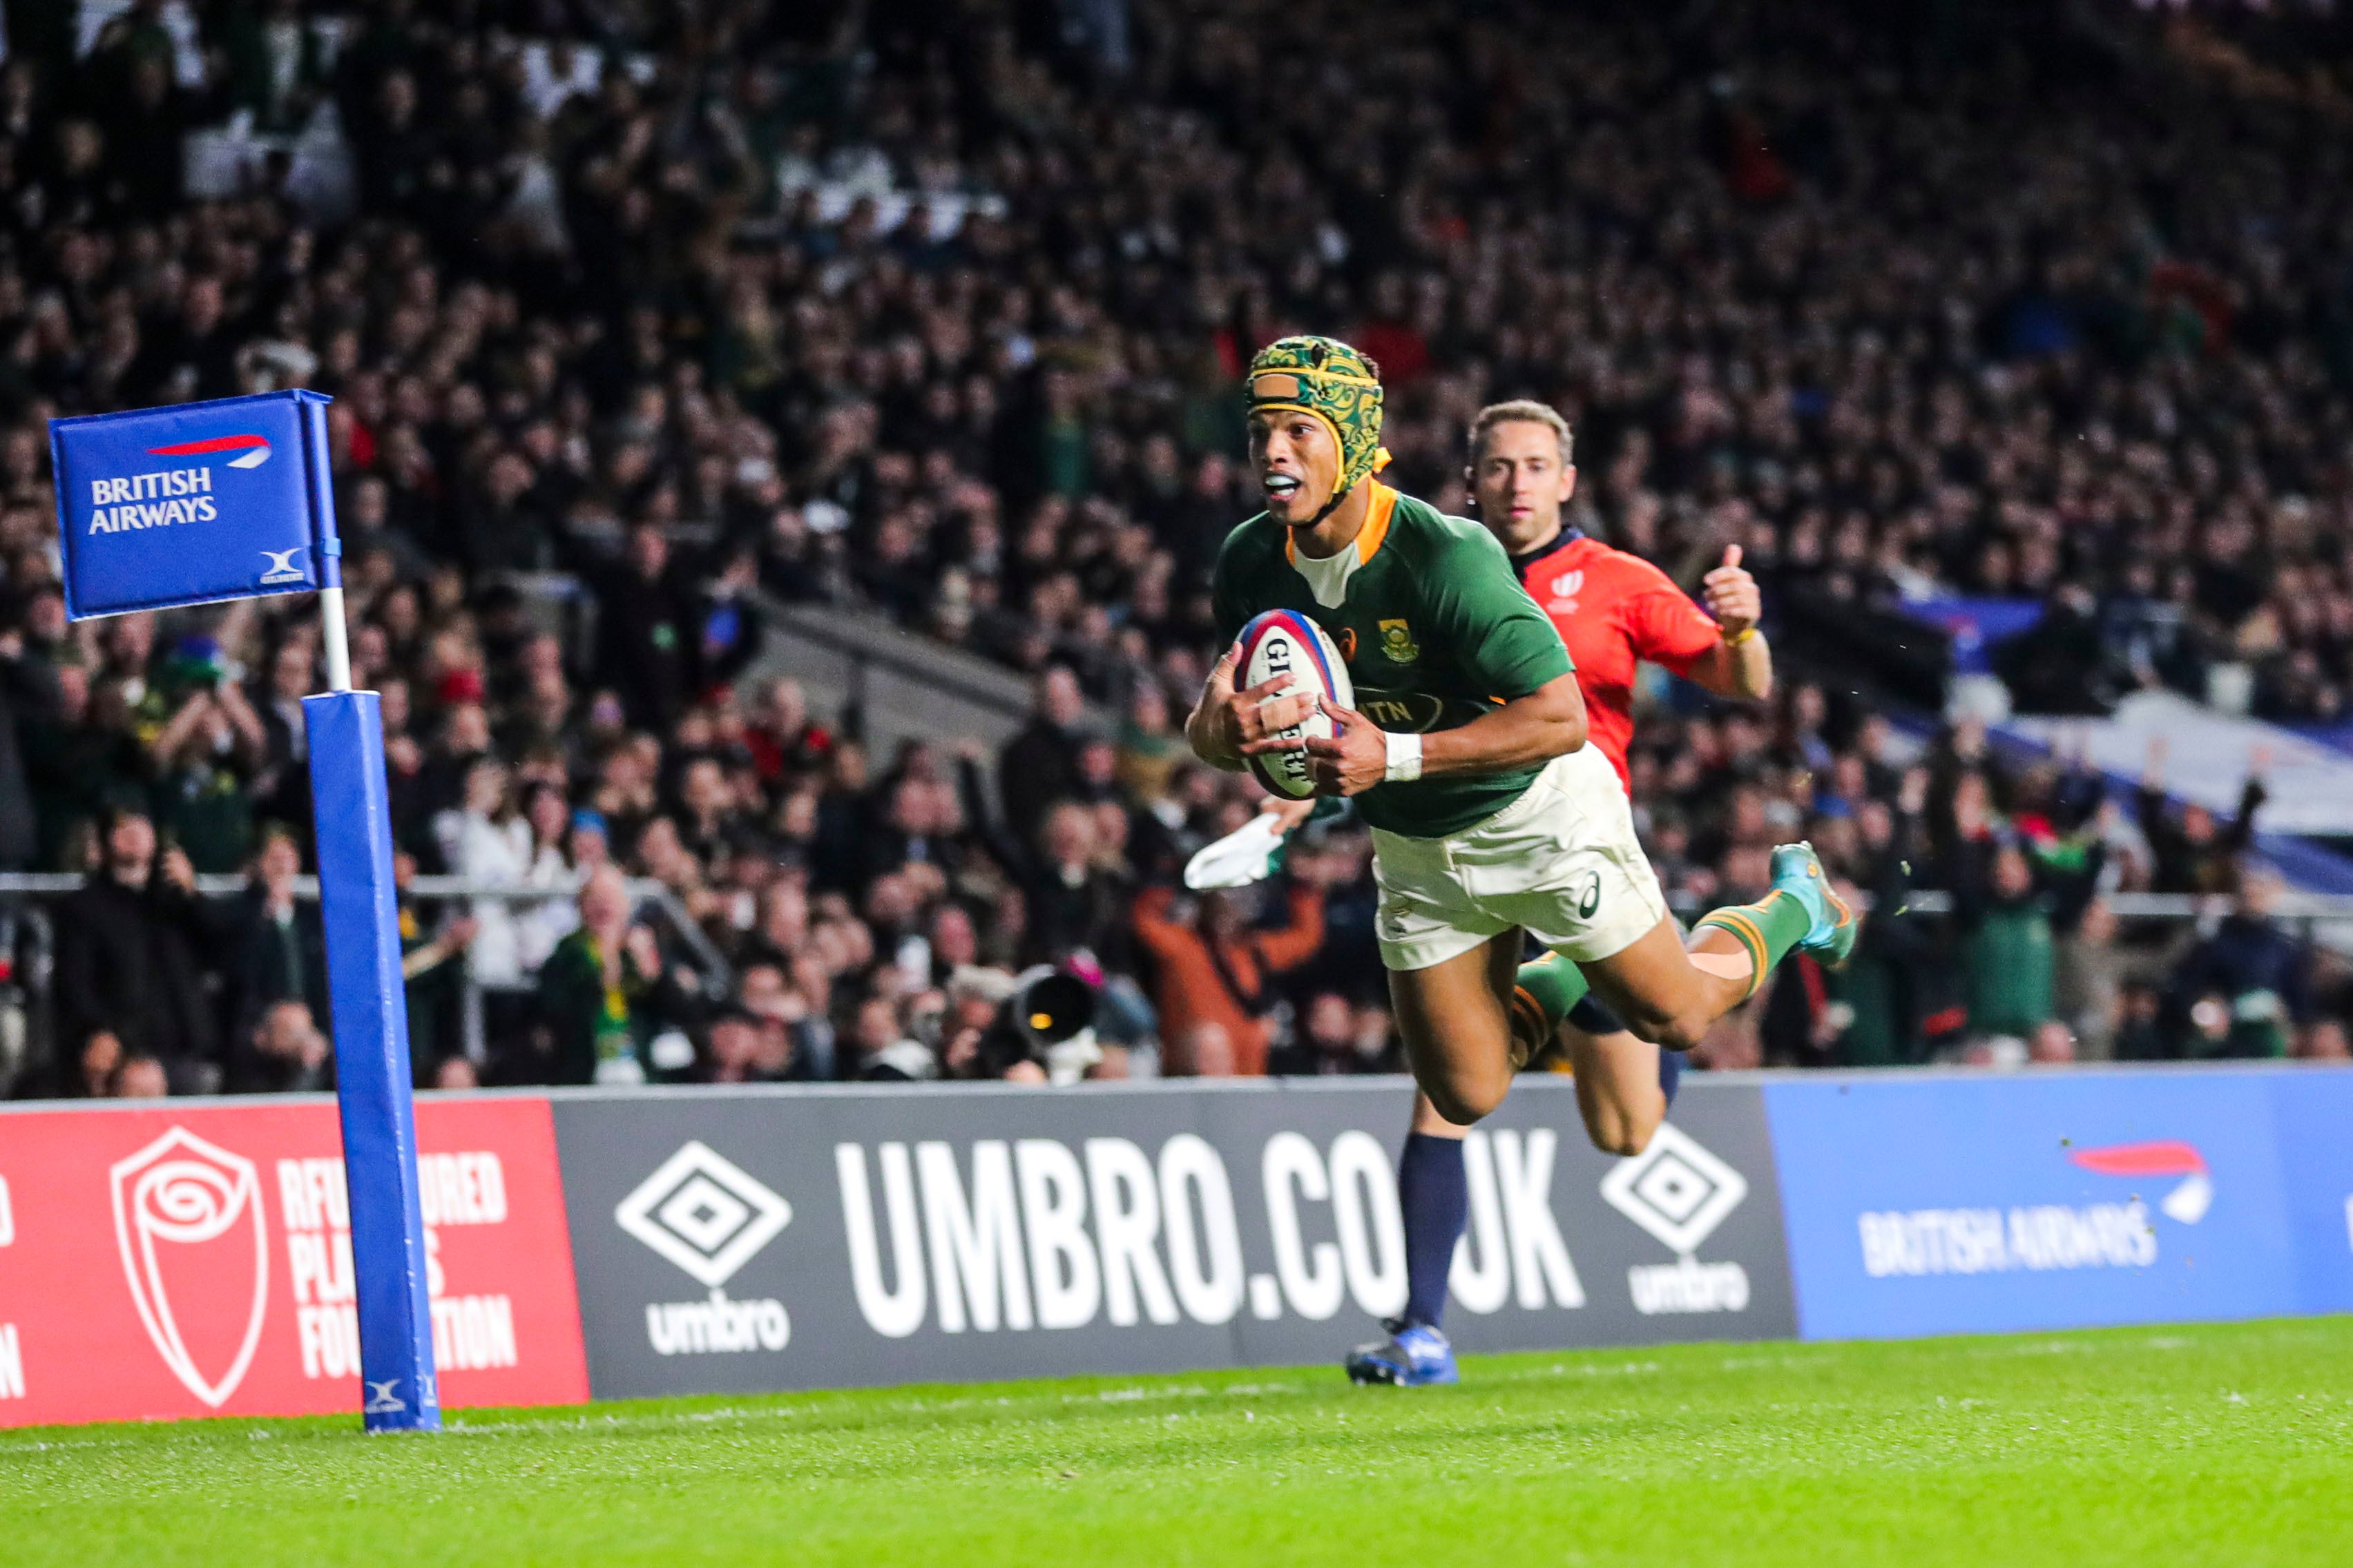 England were outclassed by South Africa at Twickenham